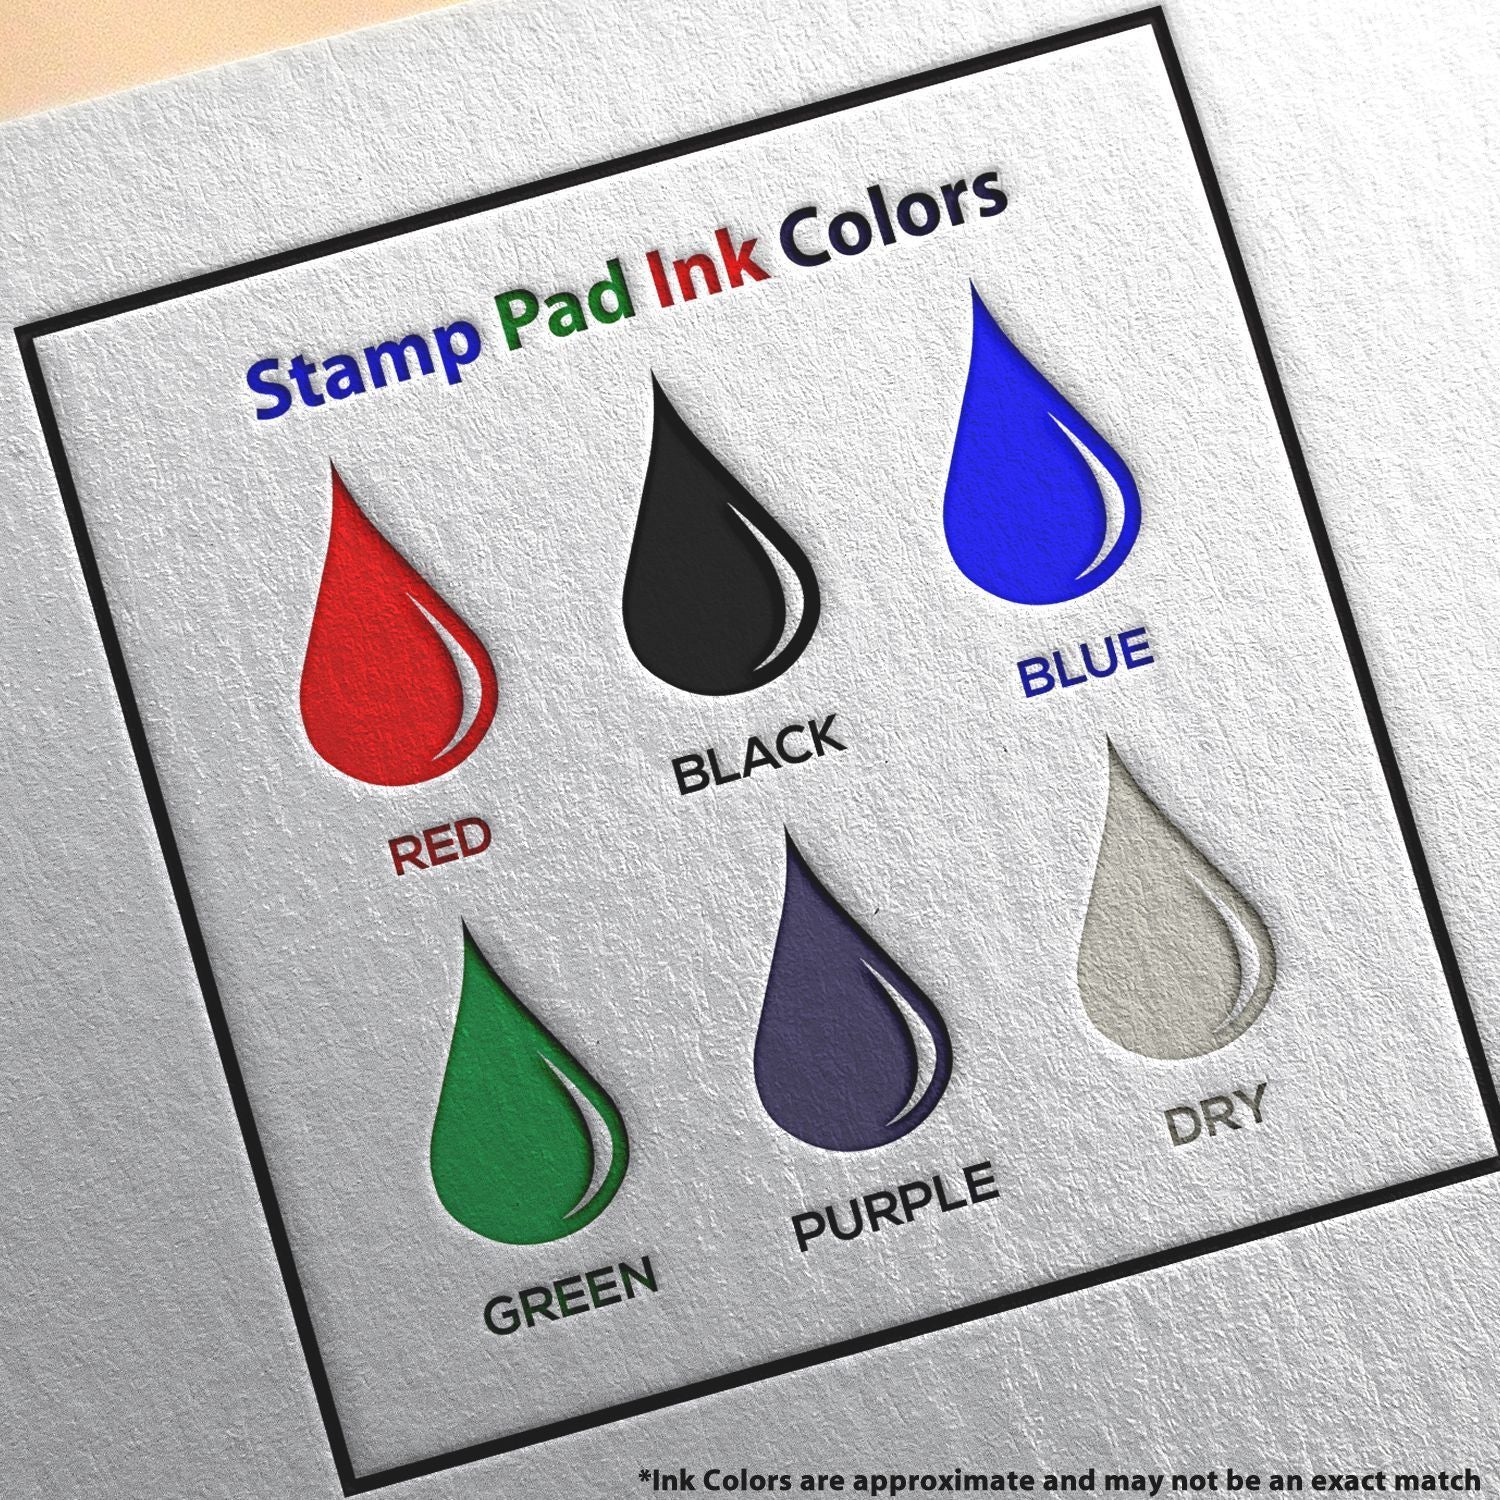 One Color Replacement Ink Pad For Hm 6015 And Hm 6115 Dry Main